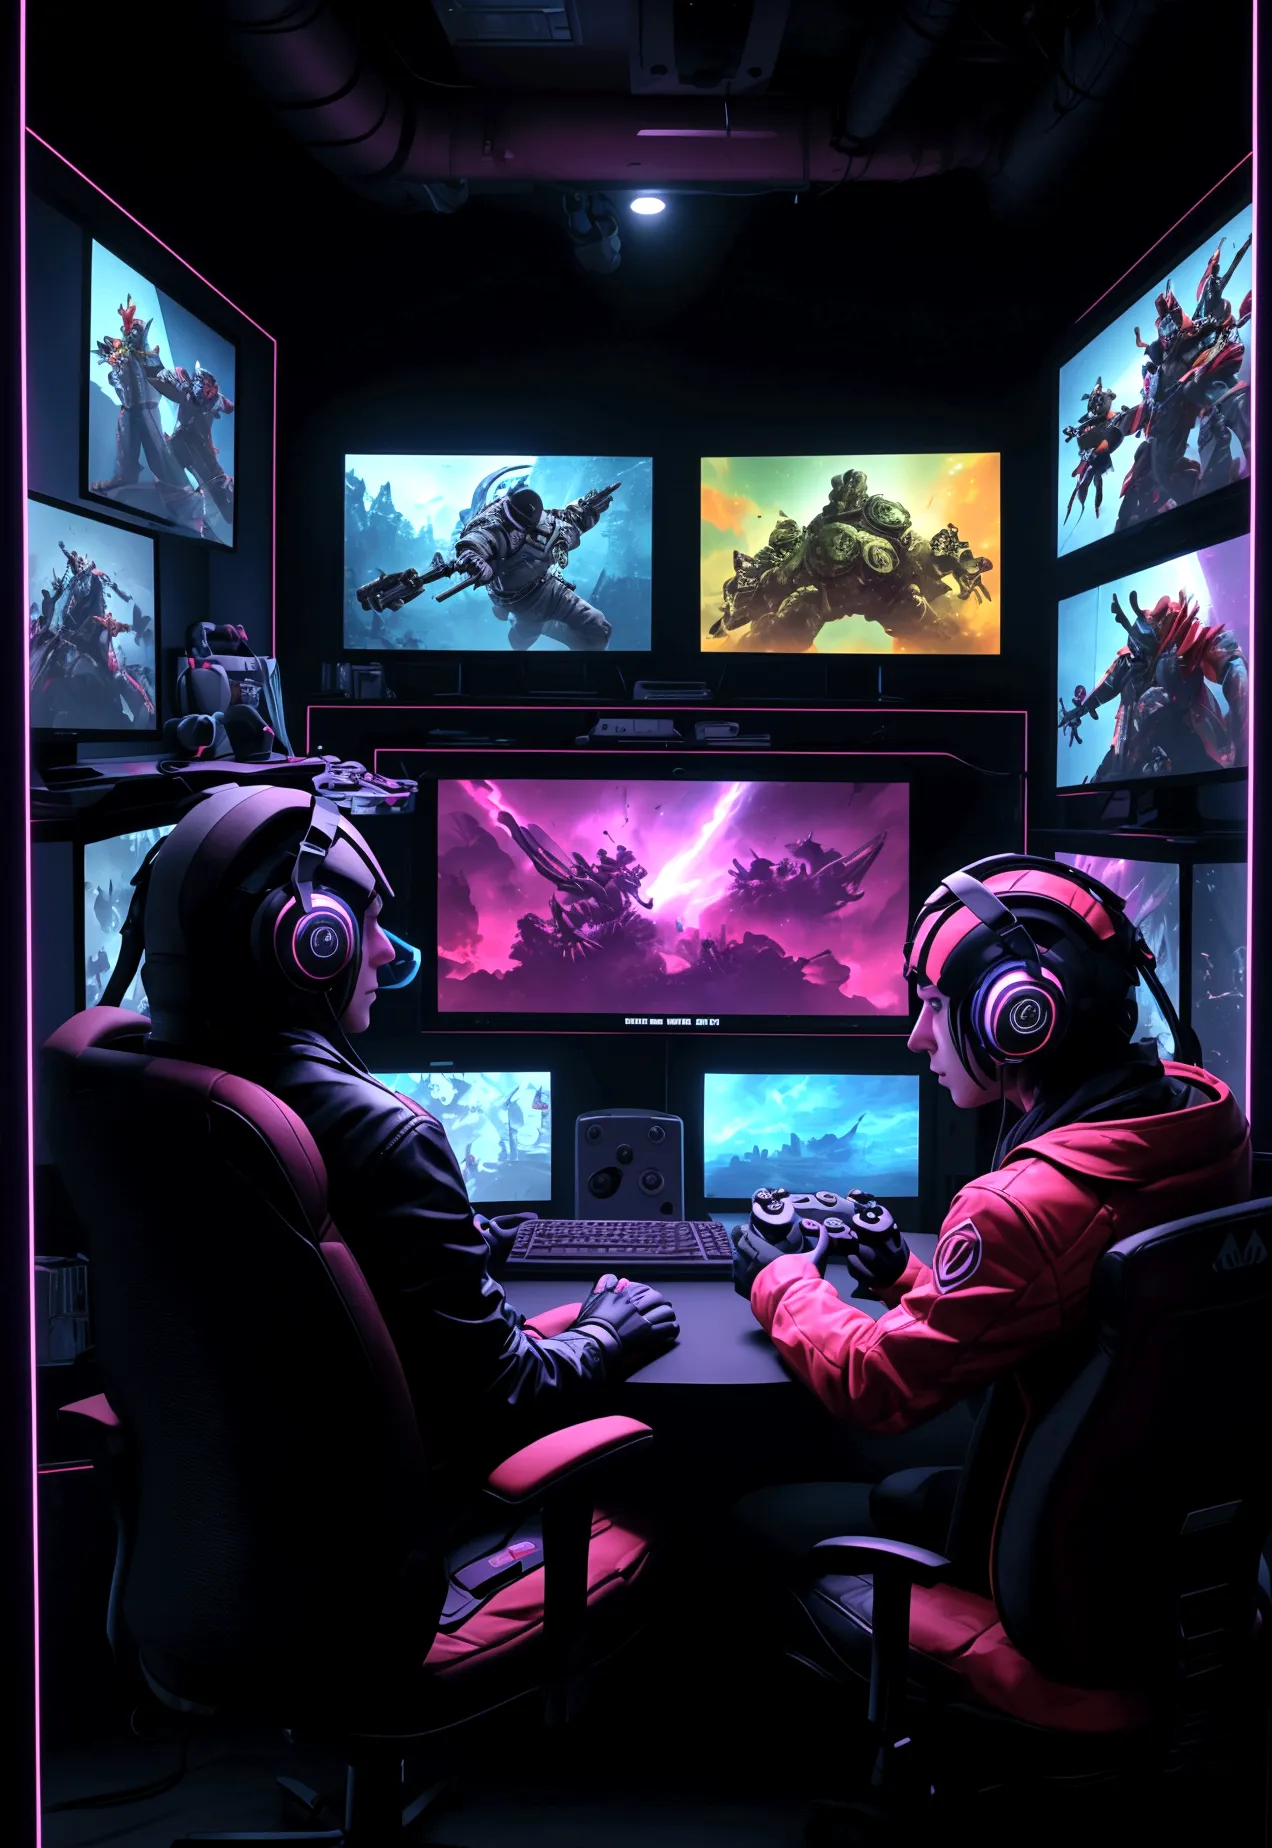 A vibrant image of a gamer with a controller in his hand, in front of several screens with different games.

Graphic elements th...